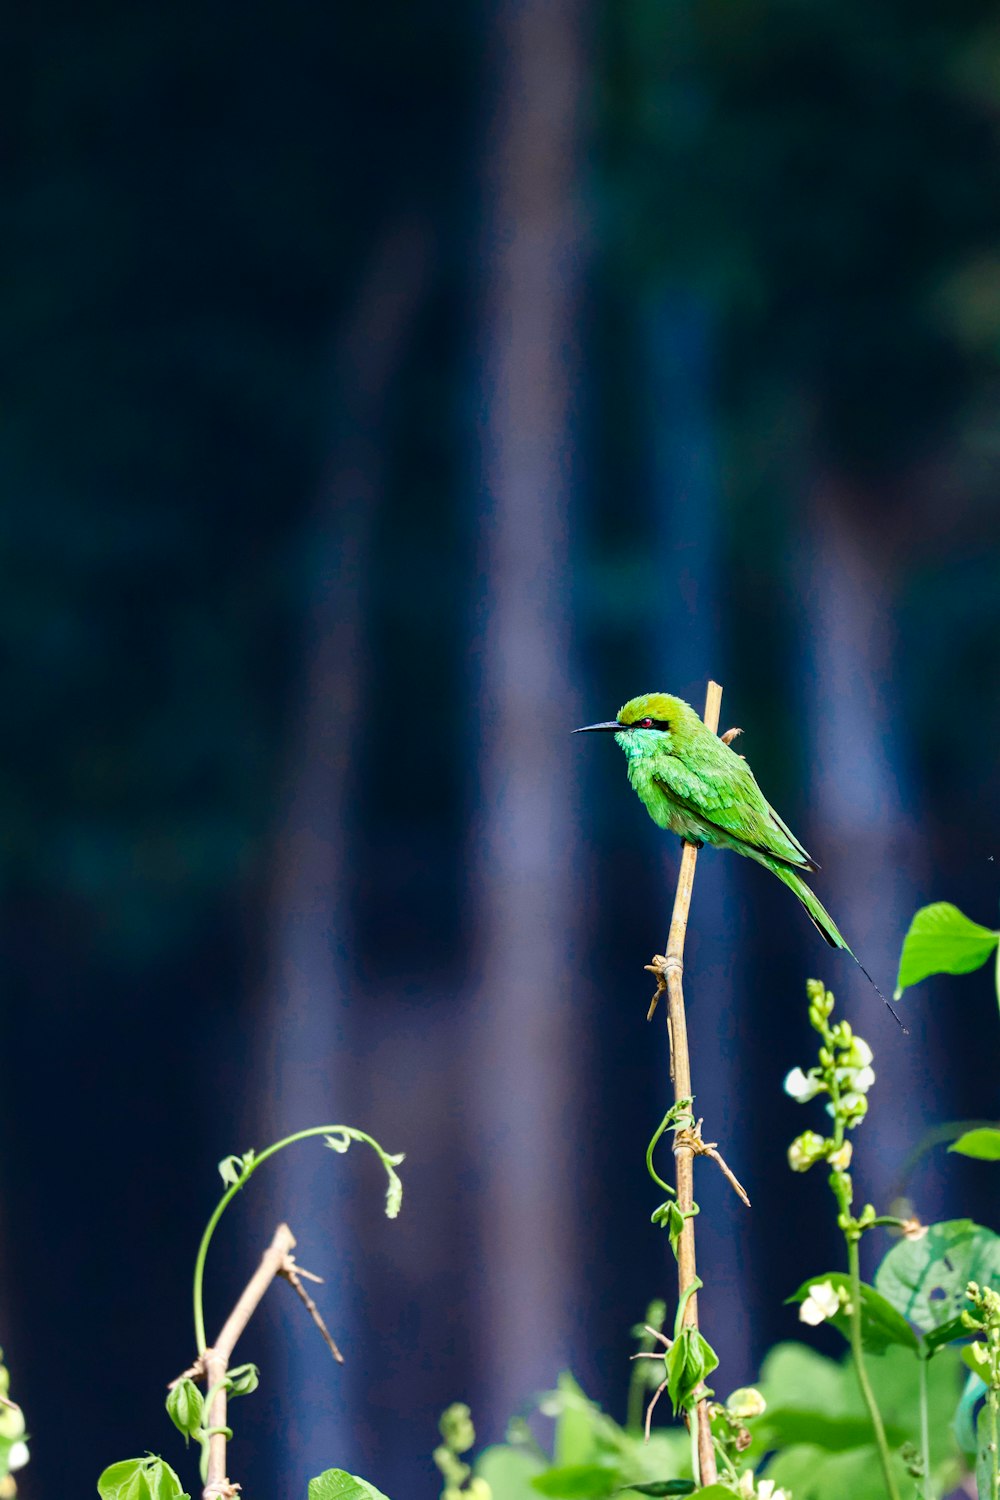 a small green bird perched on a twig